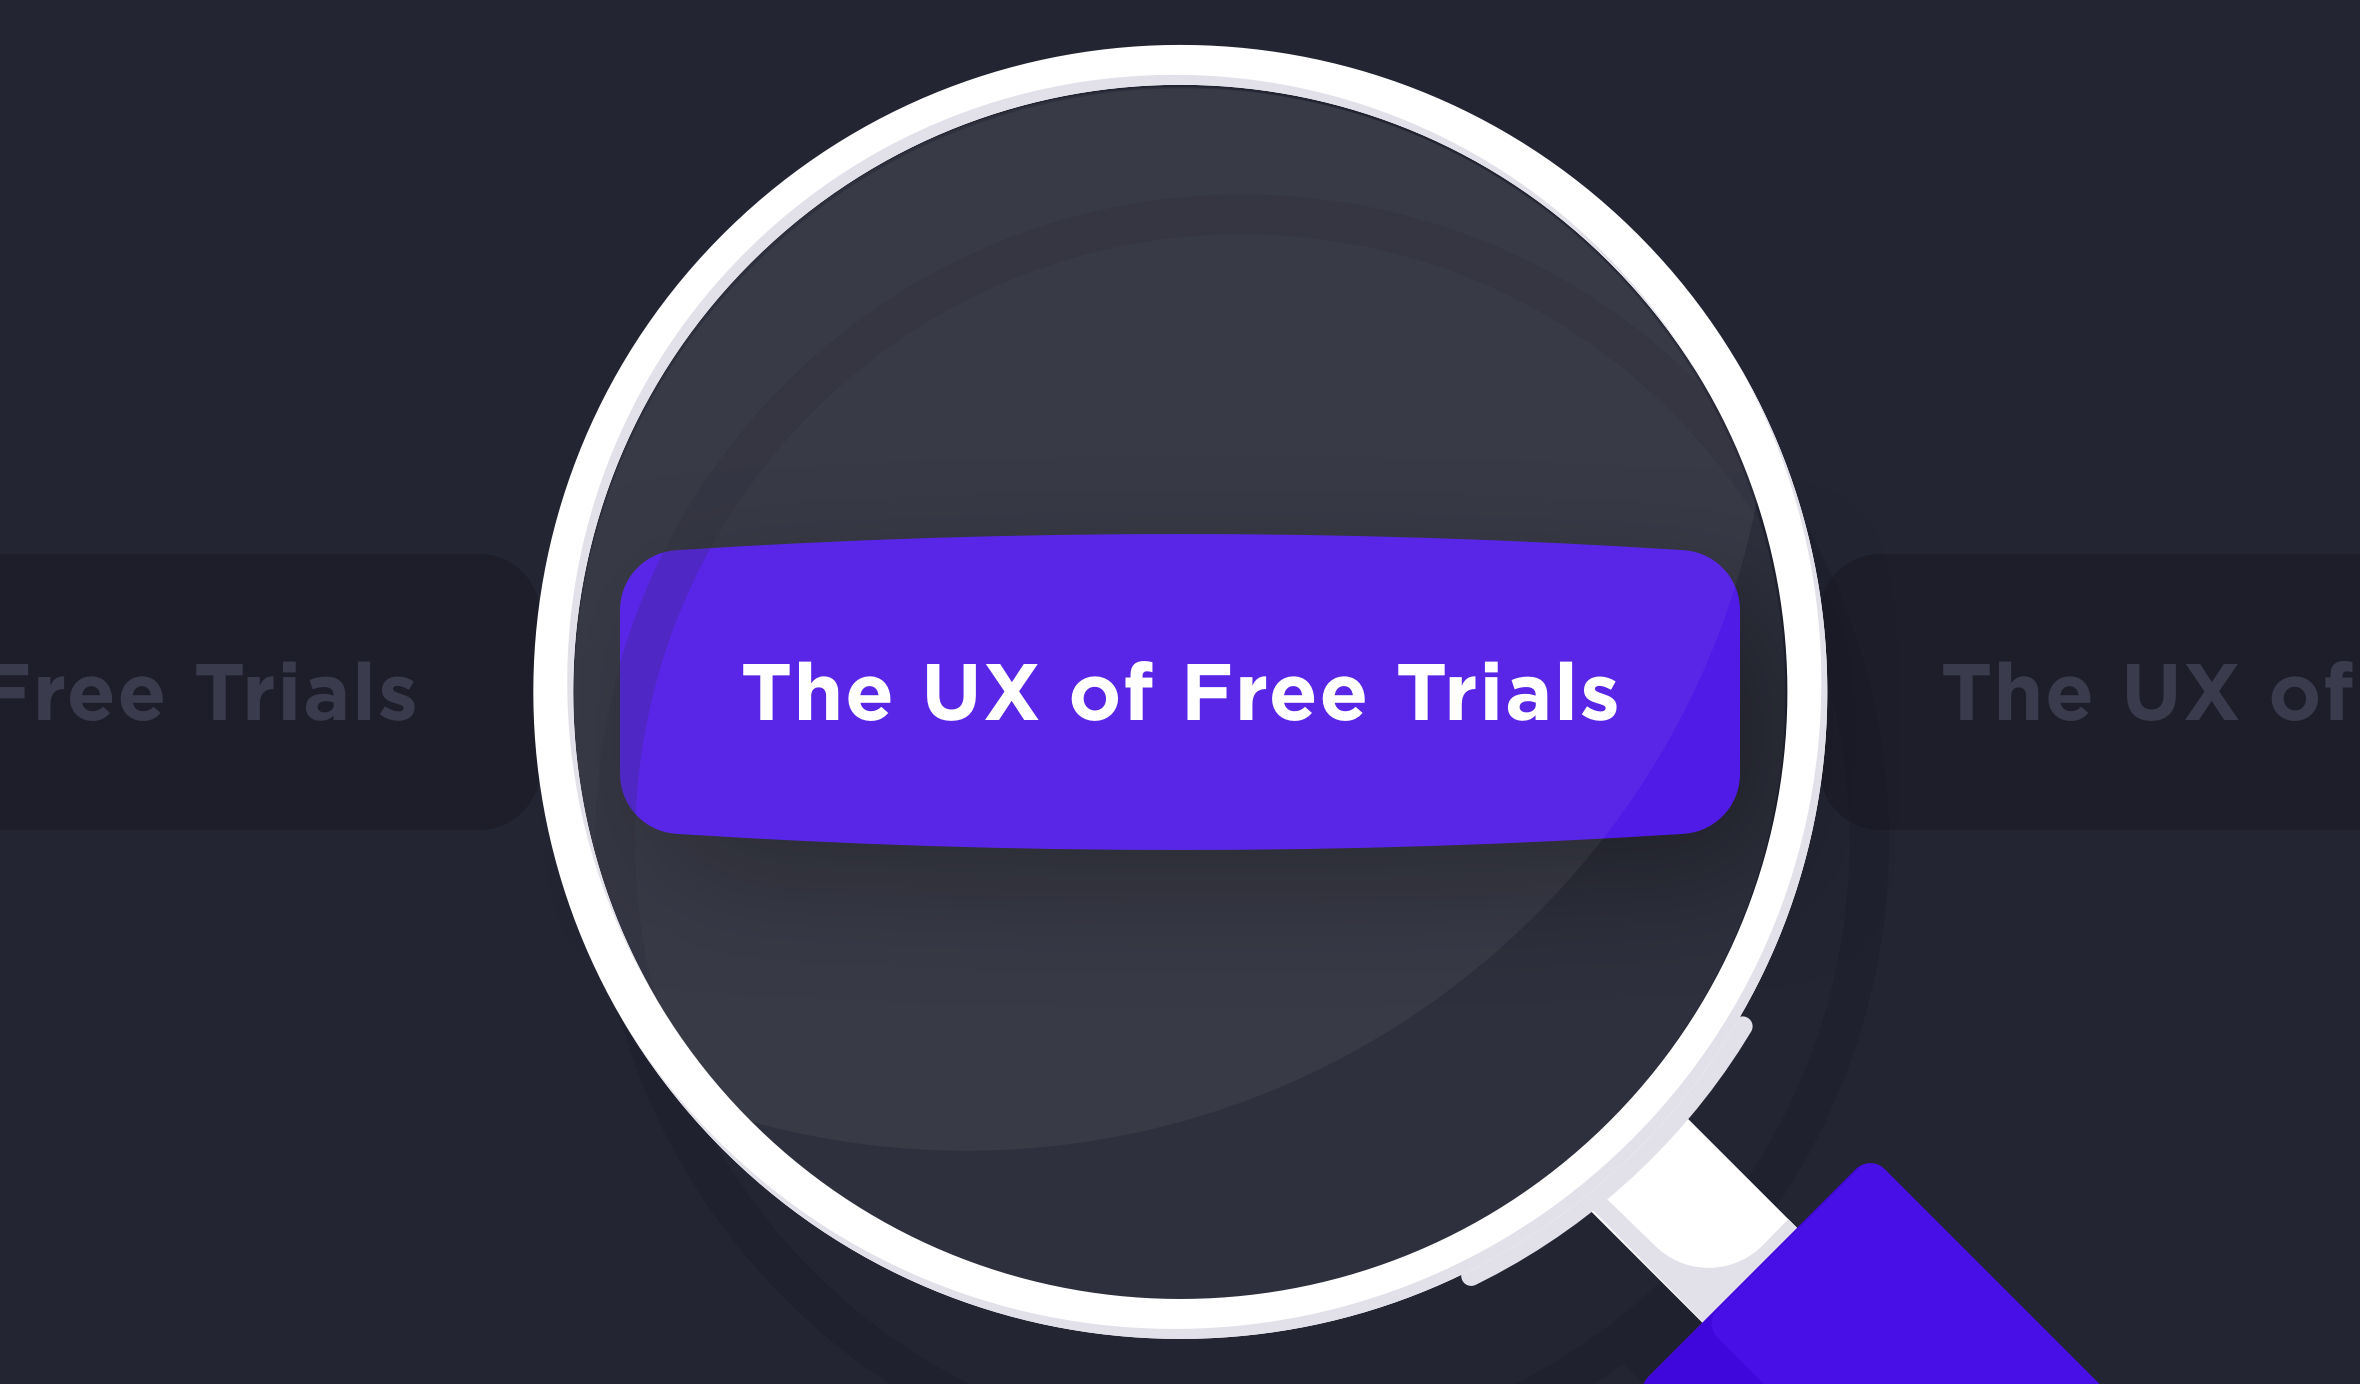 Free trial experiences